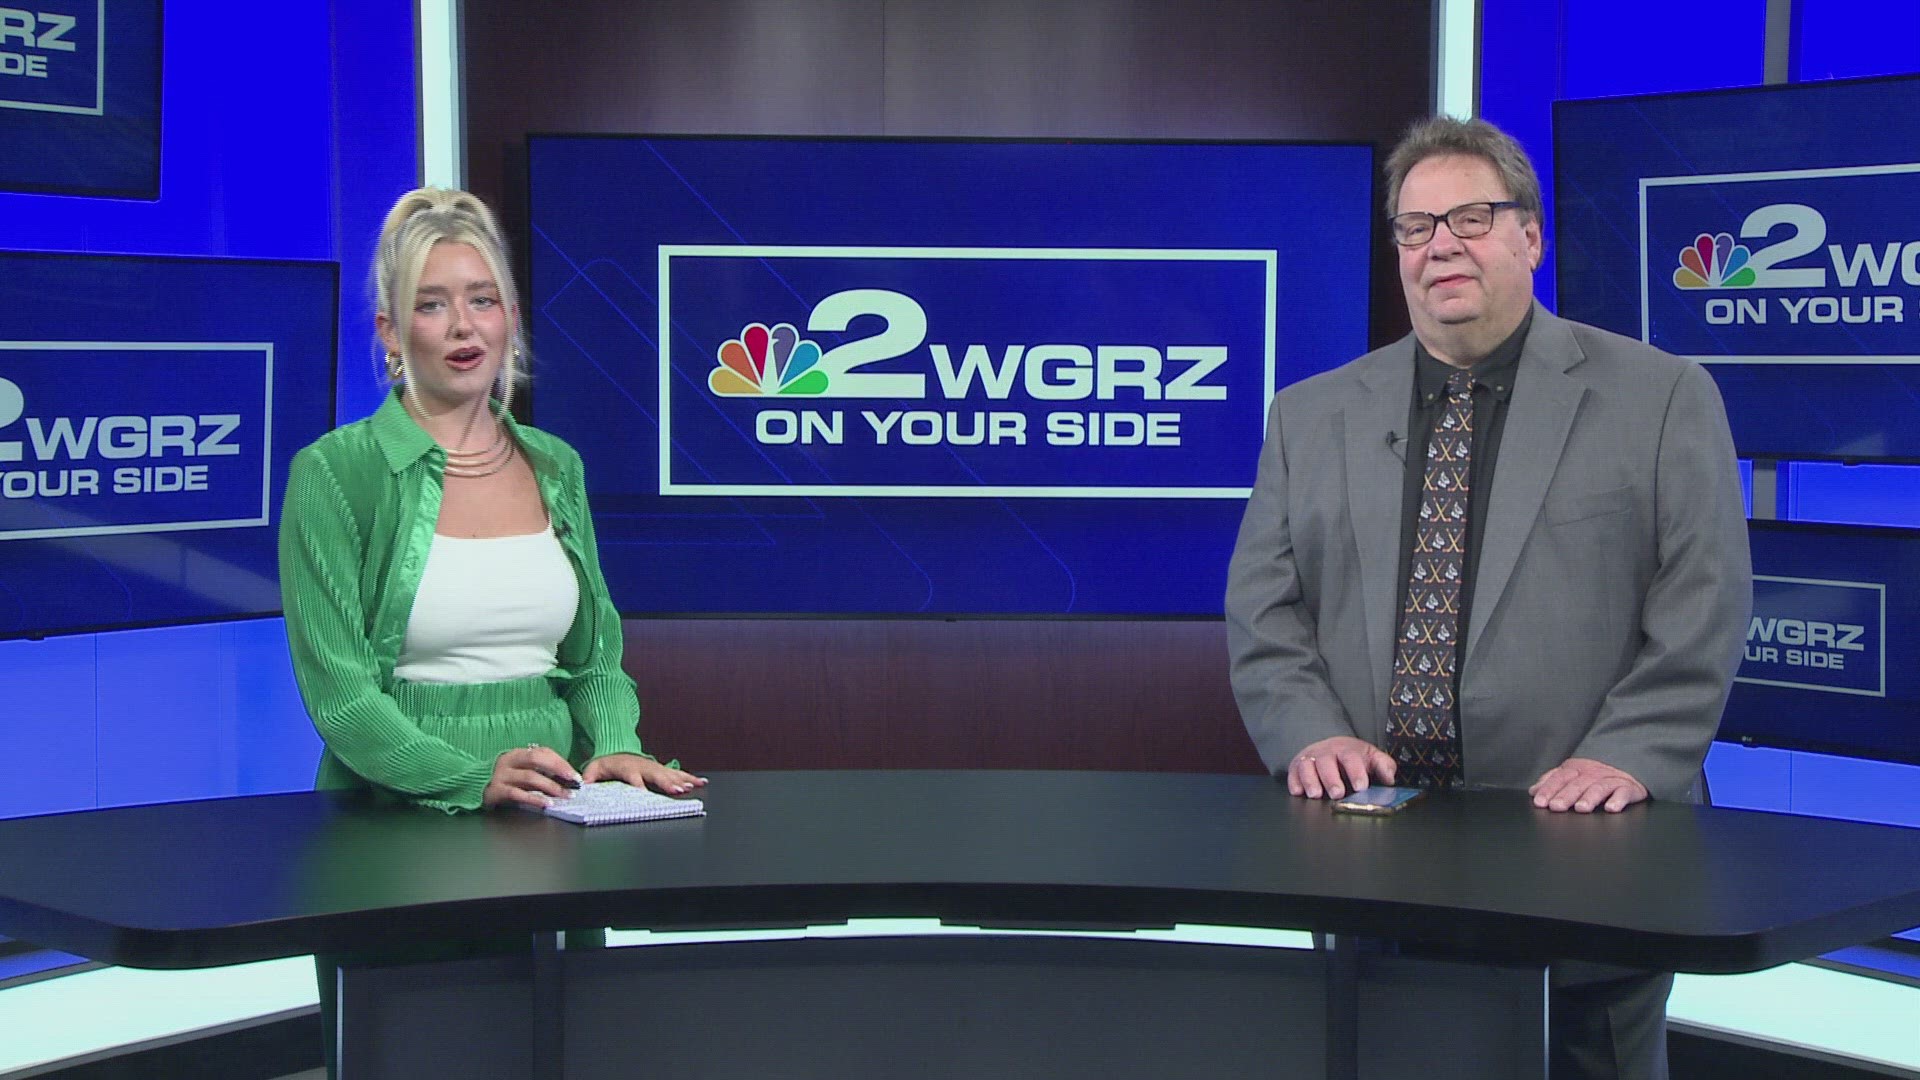 Channel 2's Lindsey Moppert and WGRZ Sabres/NHL insider Paul Hamilton discuss the fast-approaching NHL Draft and what comes next for the Buffalo Sabres.